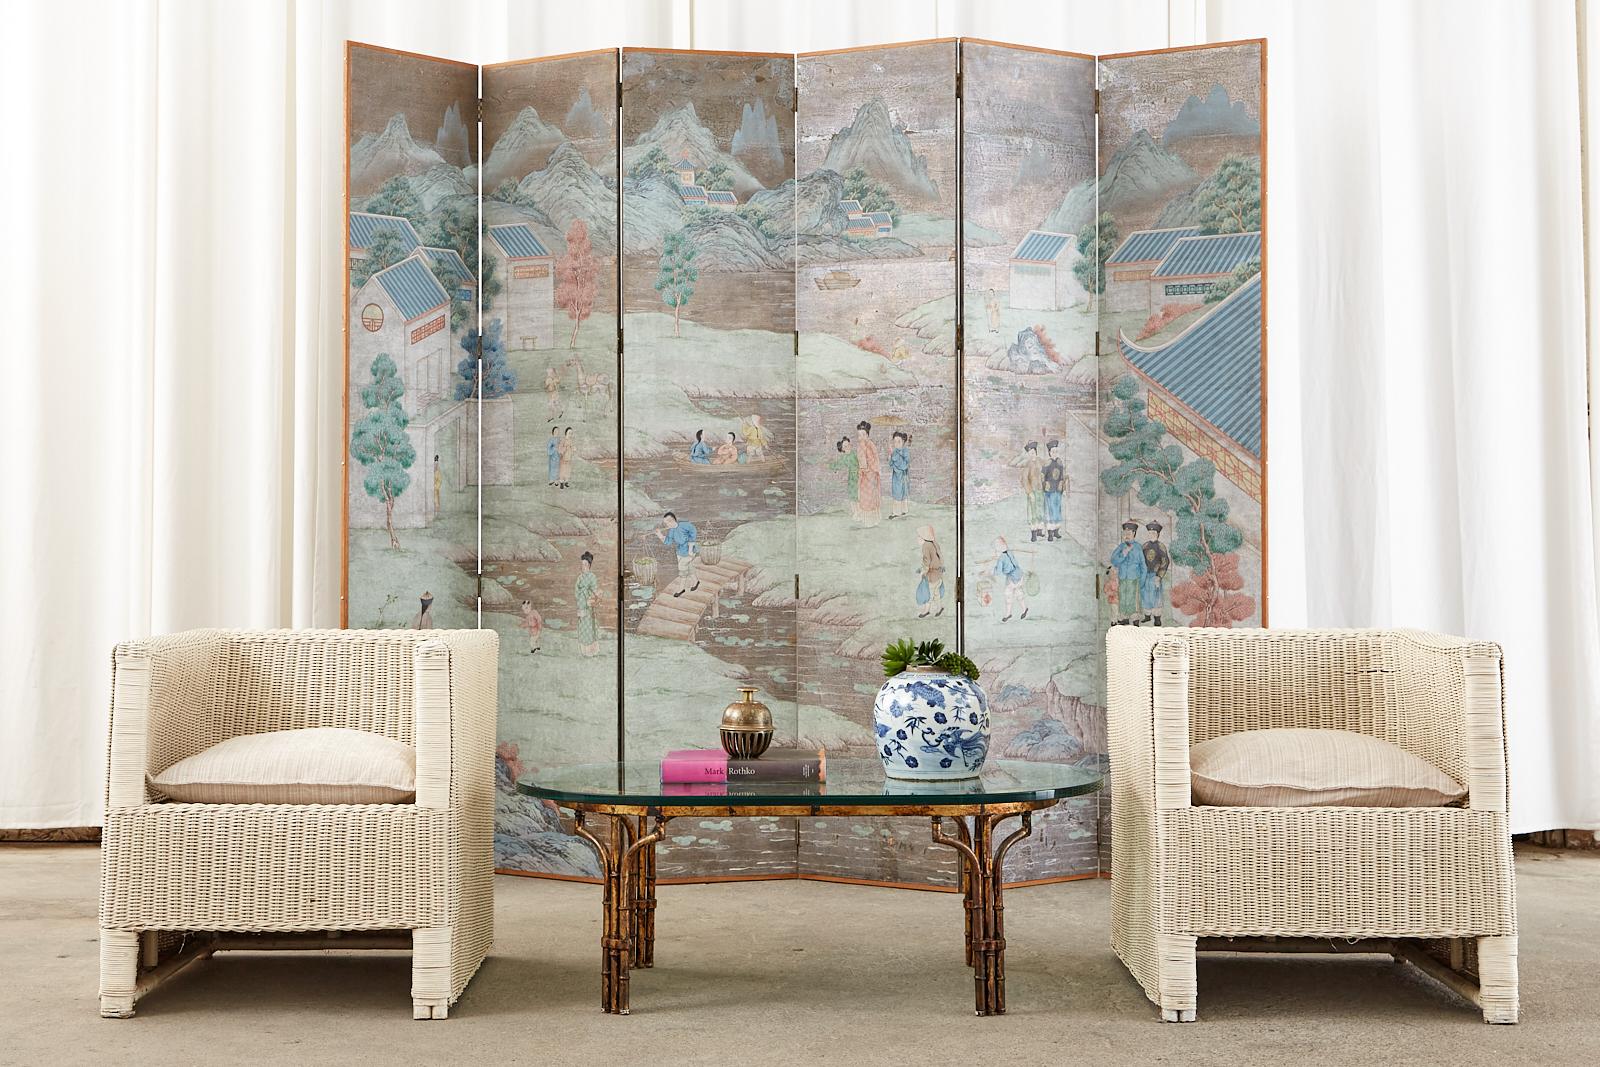 Exquisite Chinese export six-panel wallpaper screen featuring a hand-painted landscape with figures on a dramatic silver leaf ground. Made in the manner and style of Gracie's exotic landscape wallpaper paintings. Mounted on a six-panel screen with a